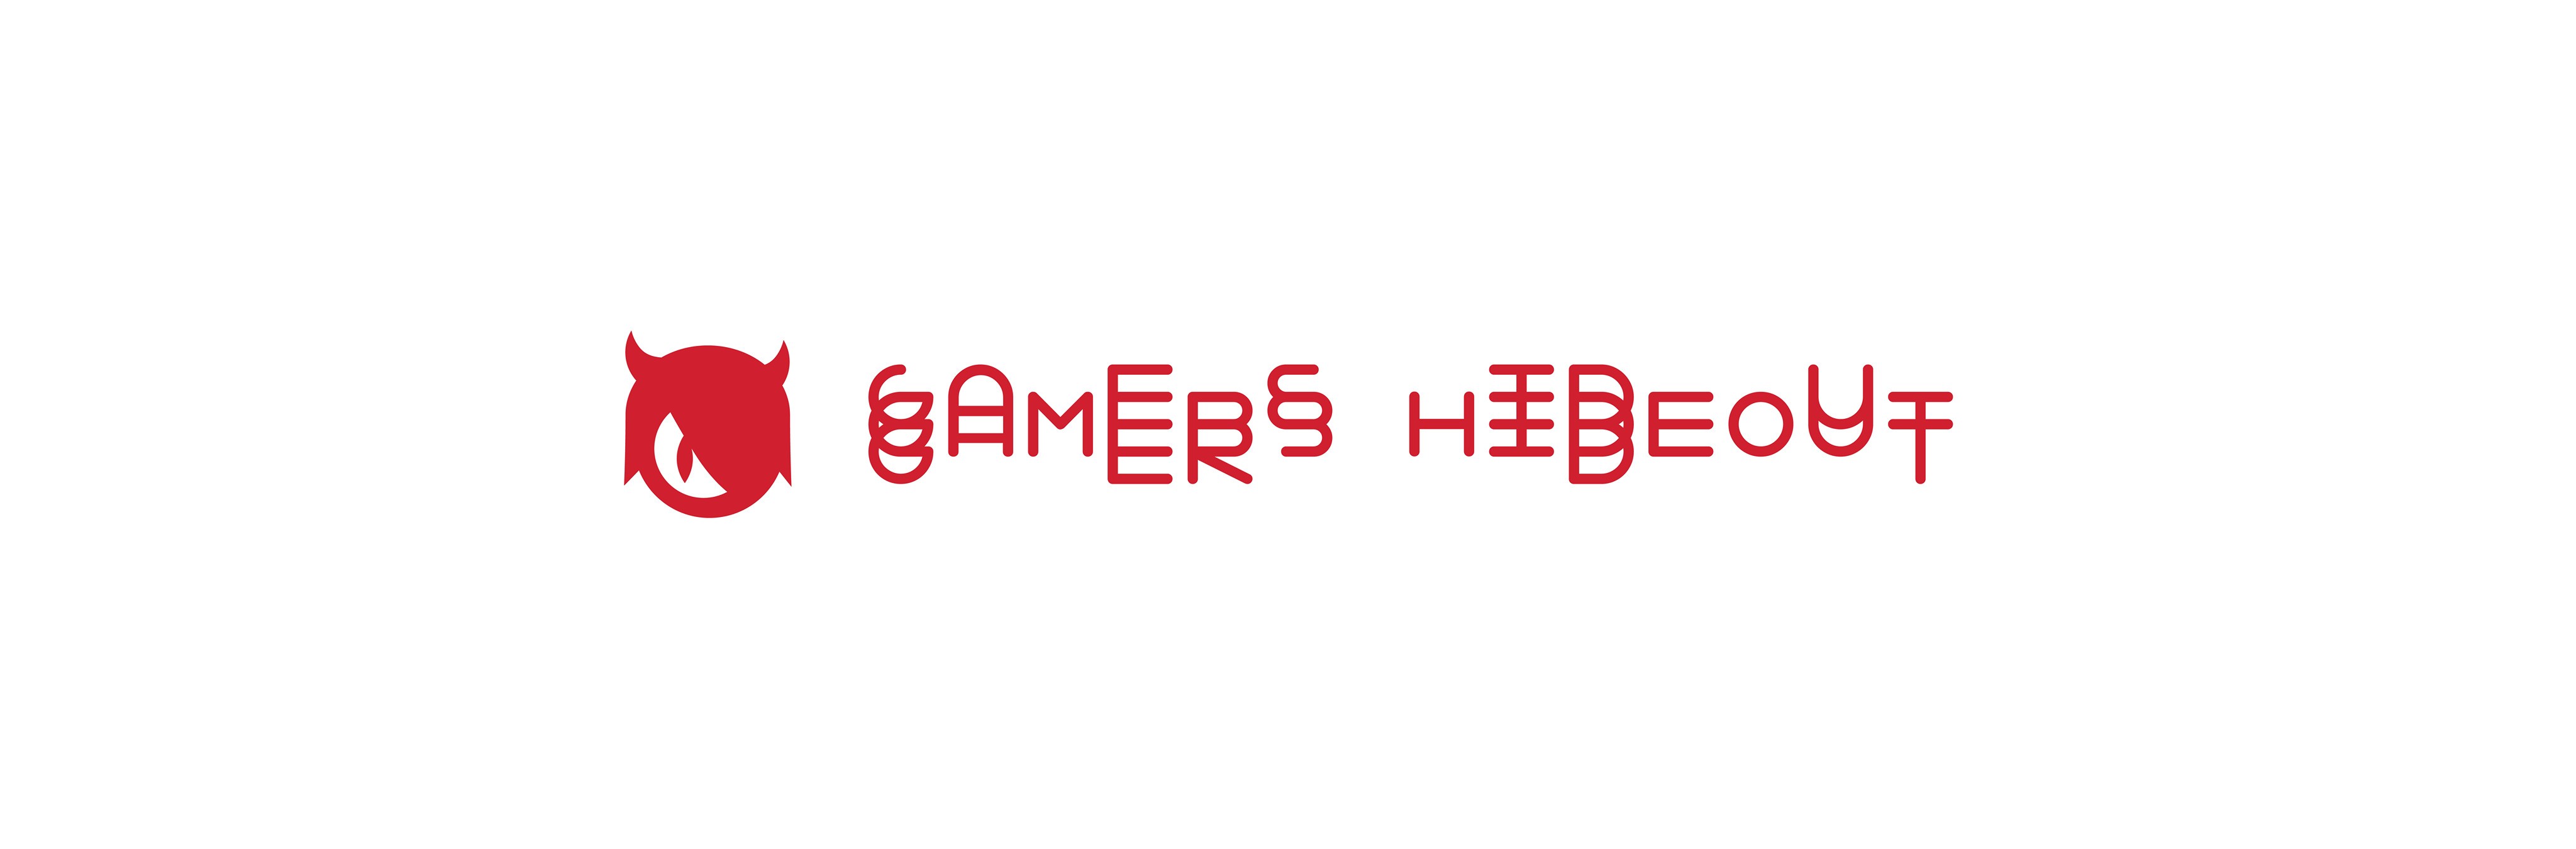 Gamers hideout